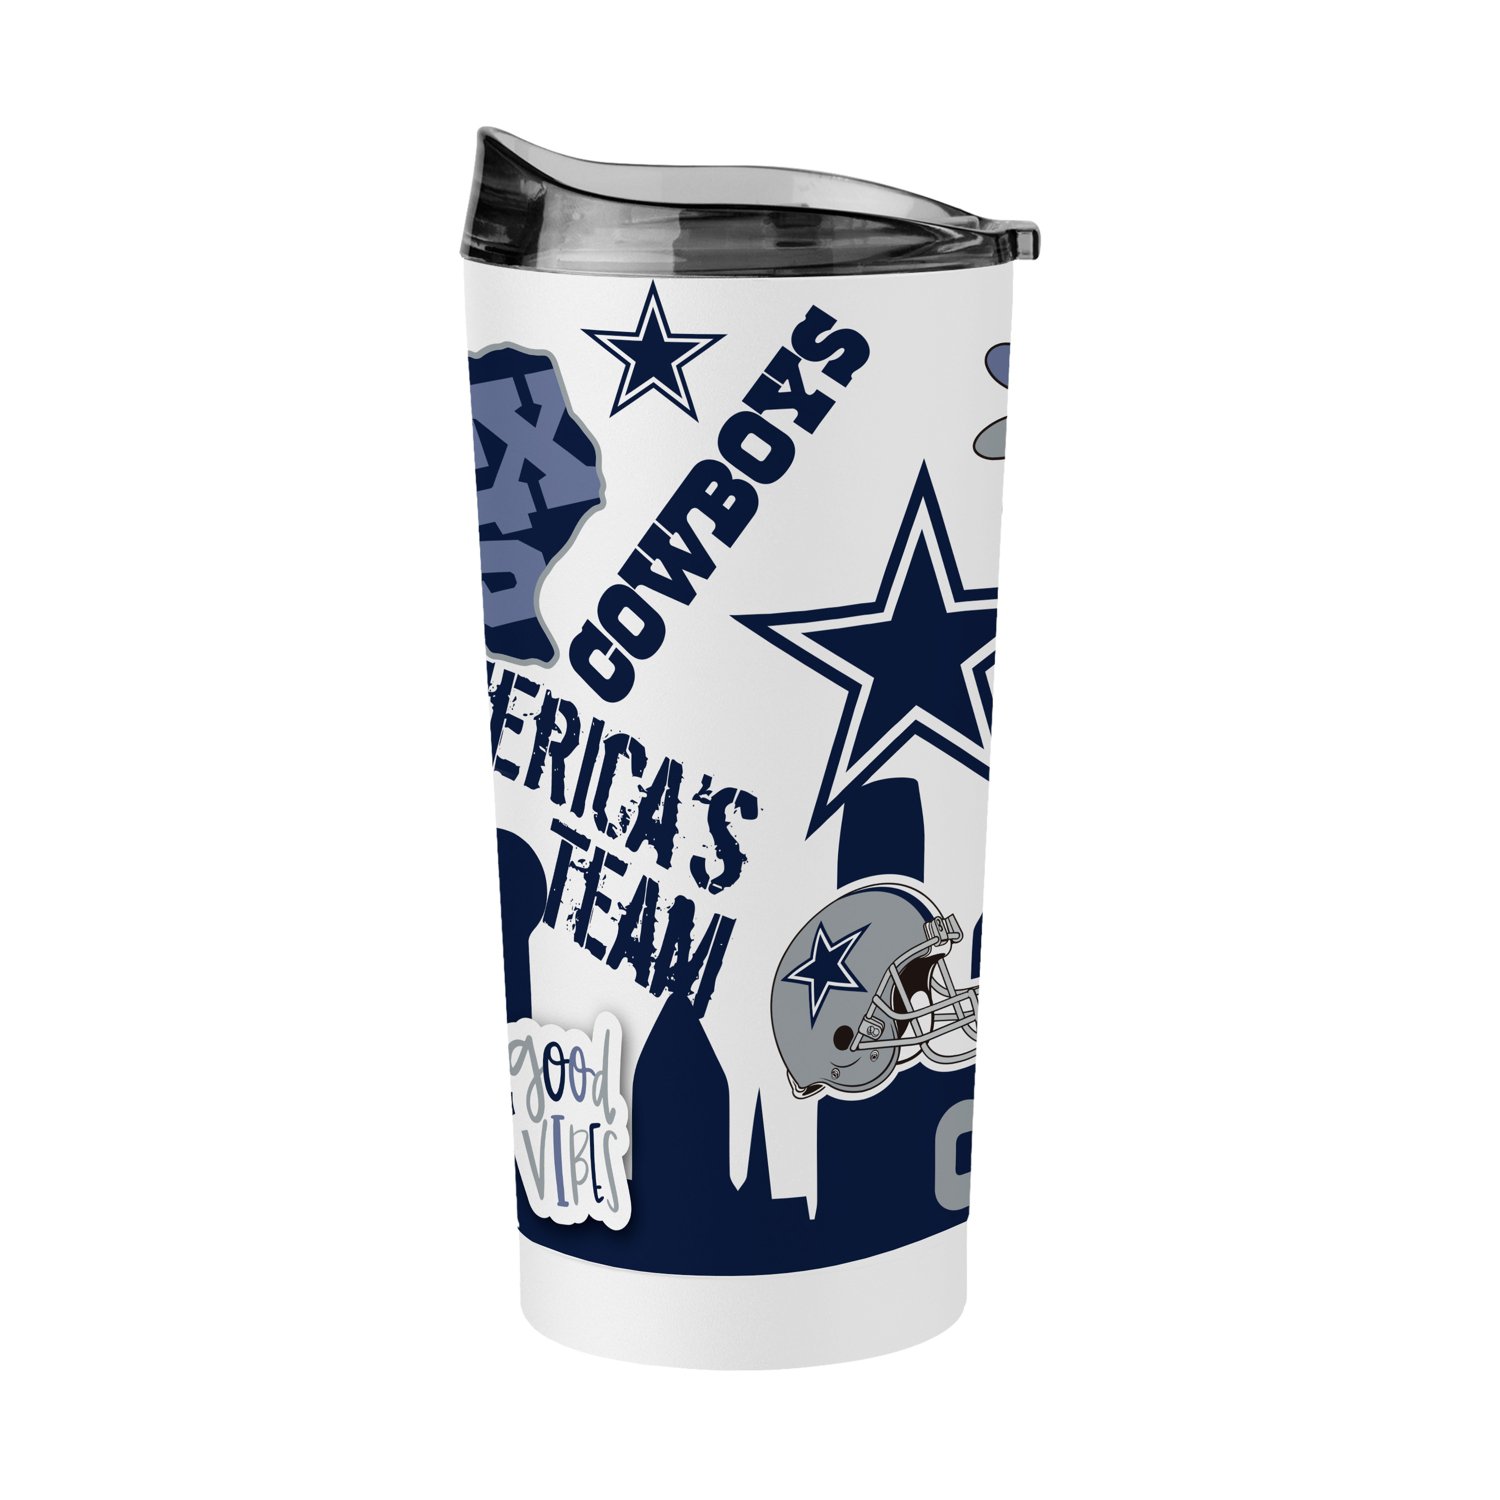 https://academy.scene7.com/is/image/academy//novelty/logo-brands-dallas-cowboys-20-oz-native-tumbler--609-s20pt-63-white/a83083b5bd7244eaa96d34578487810b?$pdp-mobile-gallery-ng$